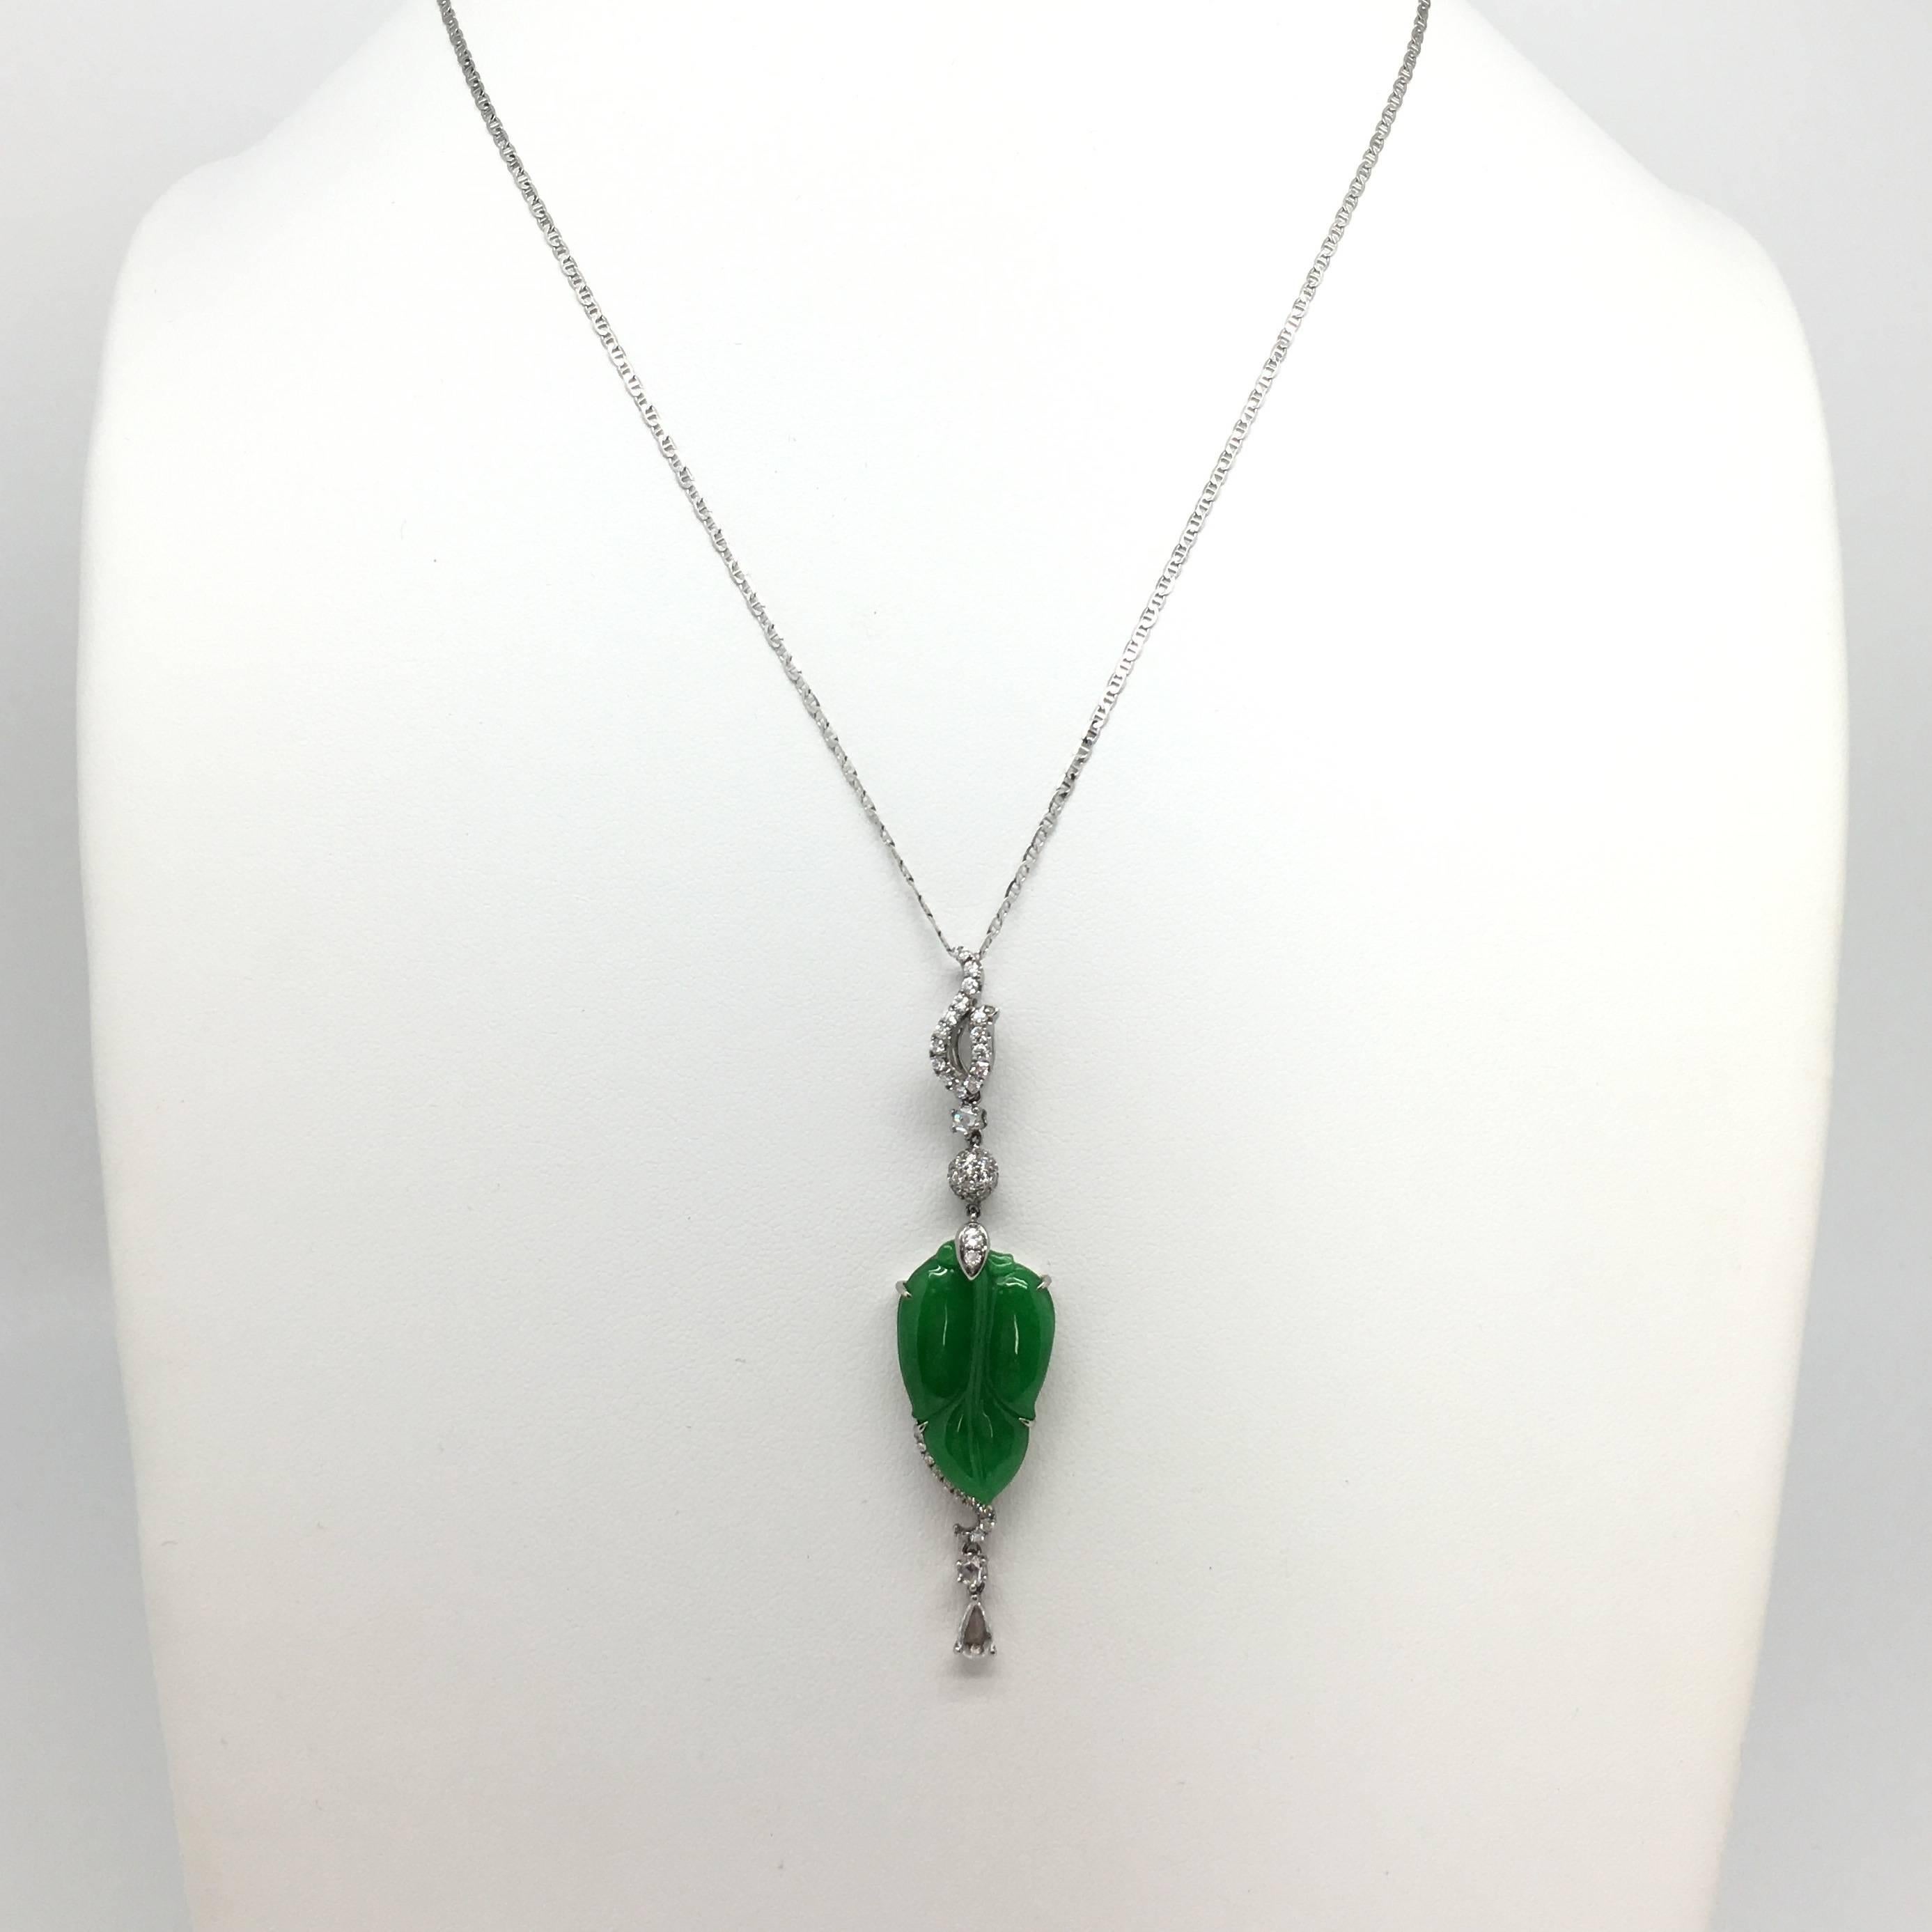 Natural Jadeite, is known as 'heavenly' and 'imperial' in the Chinese culture. Different shapes have different morals behind their carvings. Chinese people believed Jadeite brings good luck, good health or protection to the wearer.

This 7.35 carat